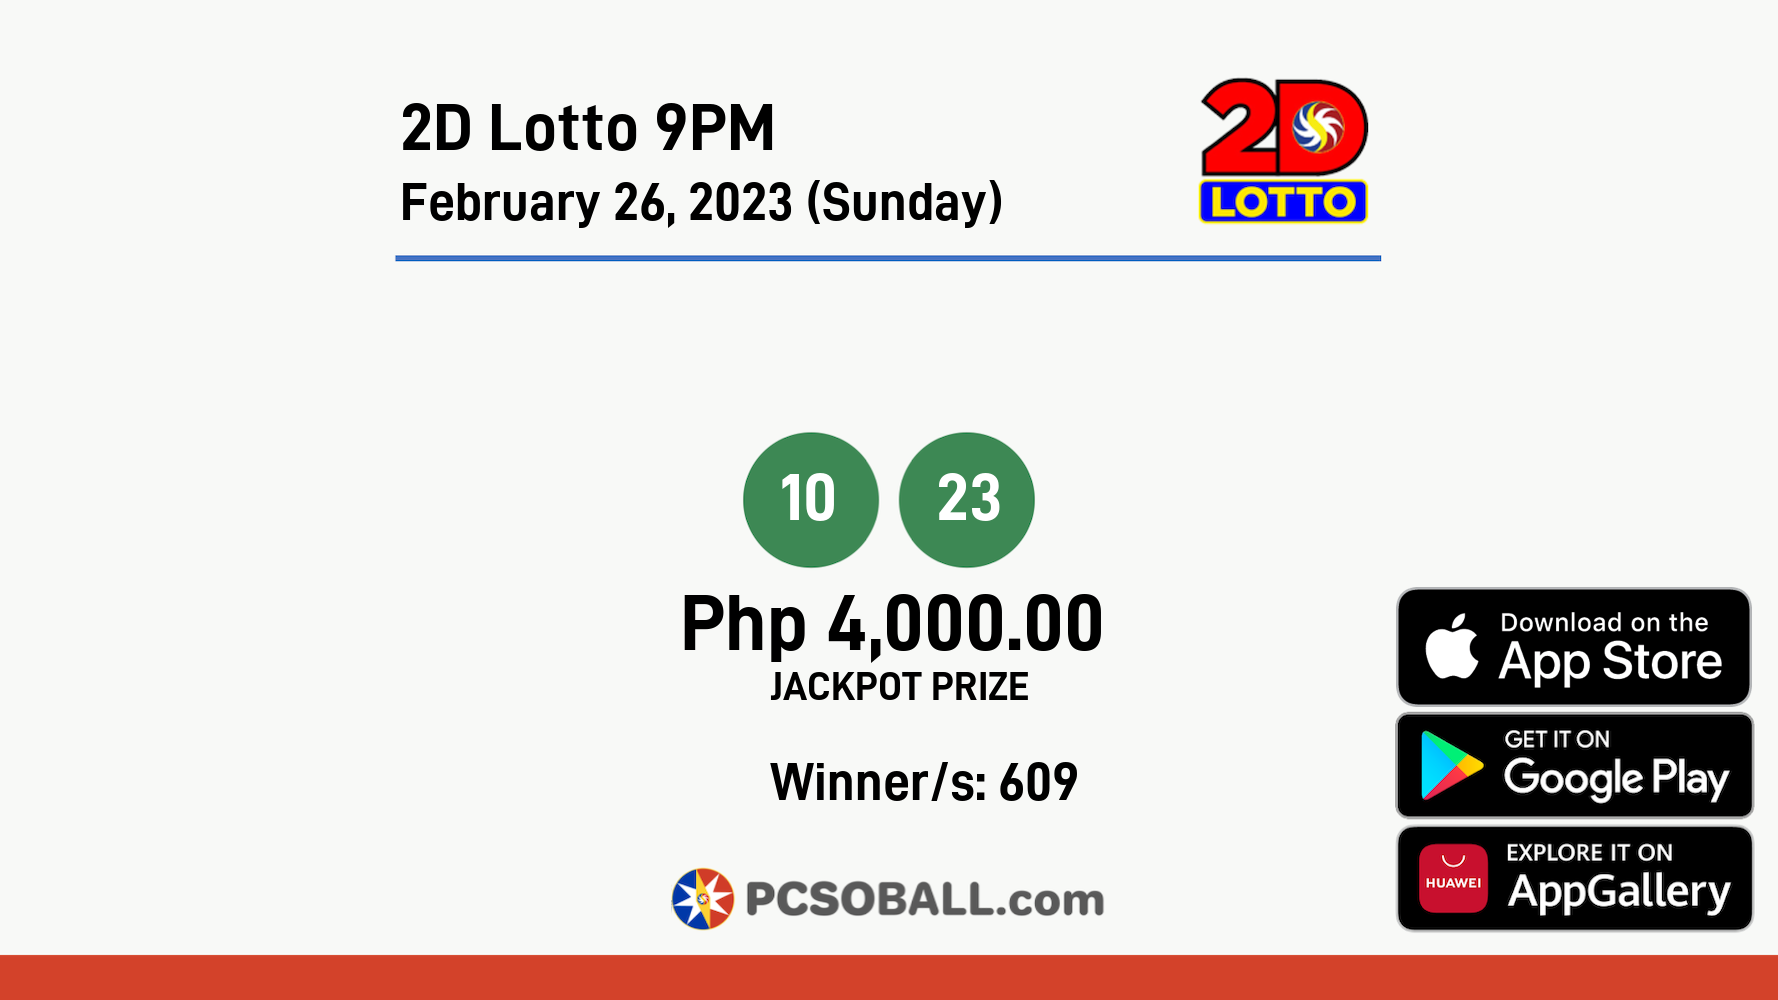 2D Lotto 9PM February 26, 2023 (Sunday) Result